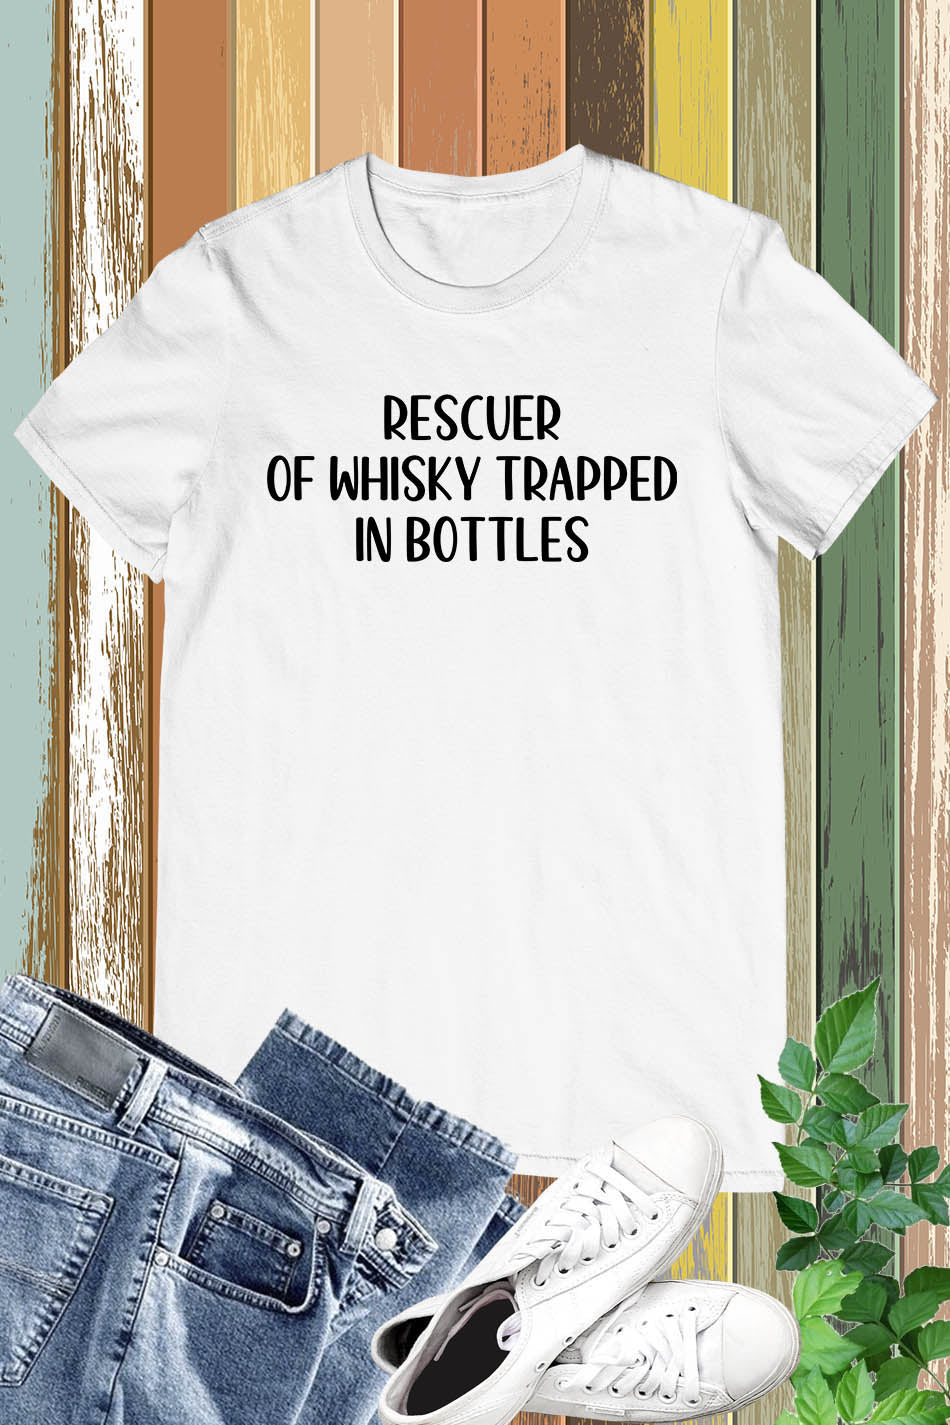 Rescuer of whisky trapped in bottles funny Shirt